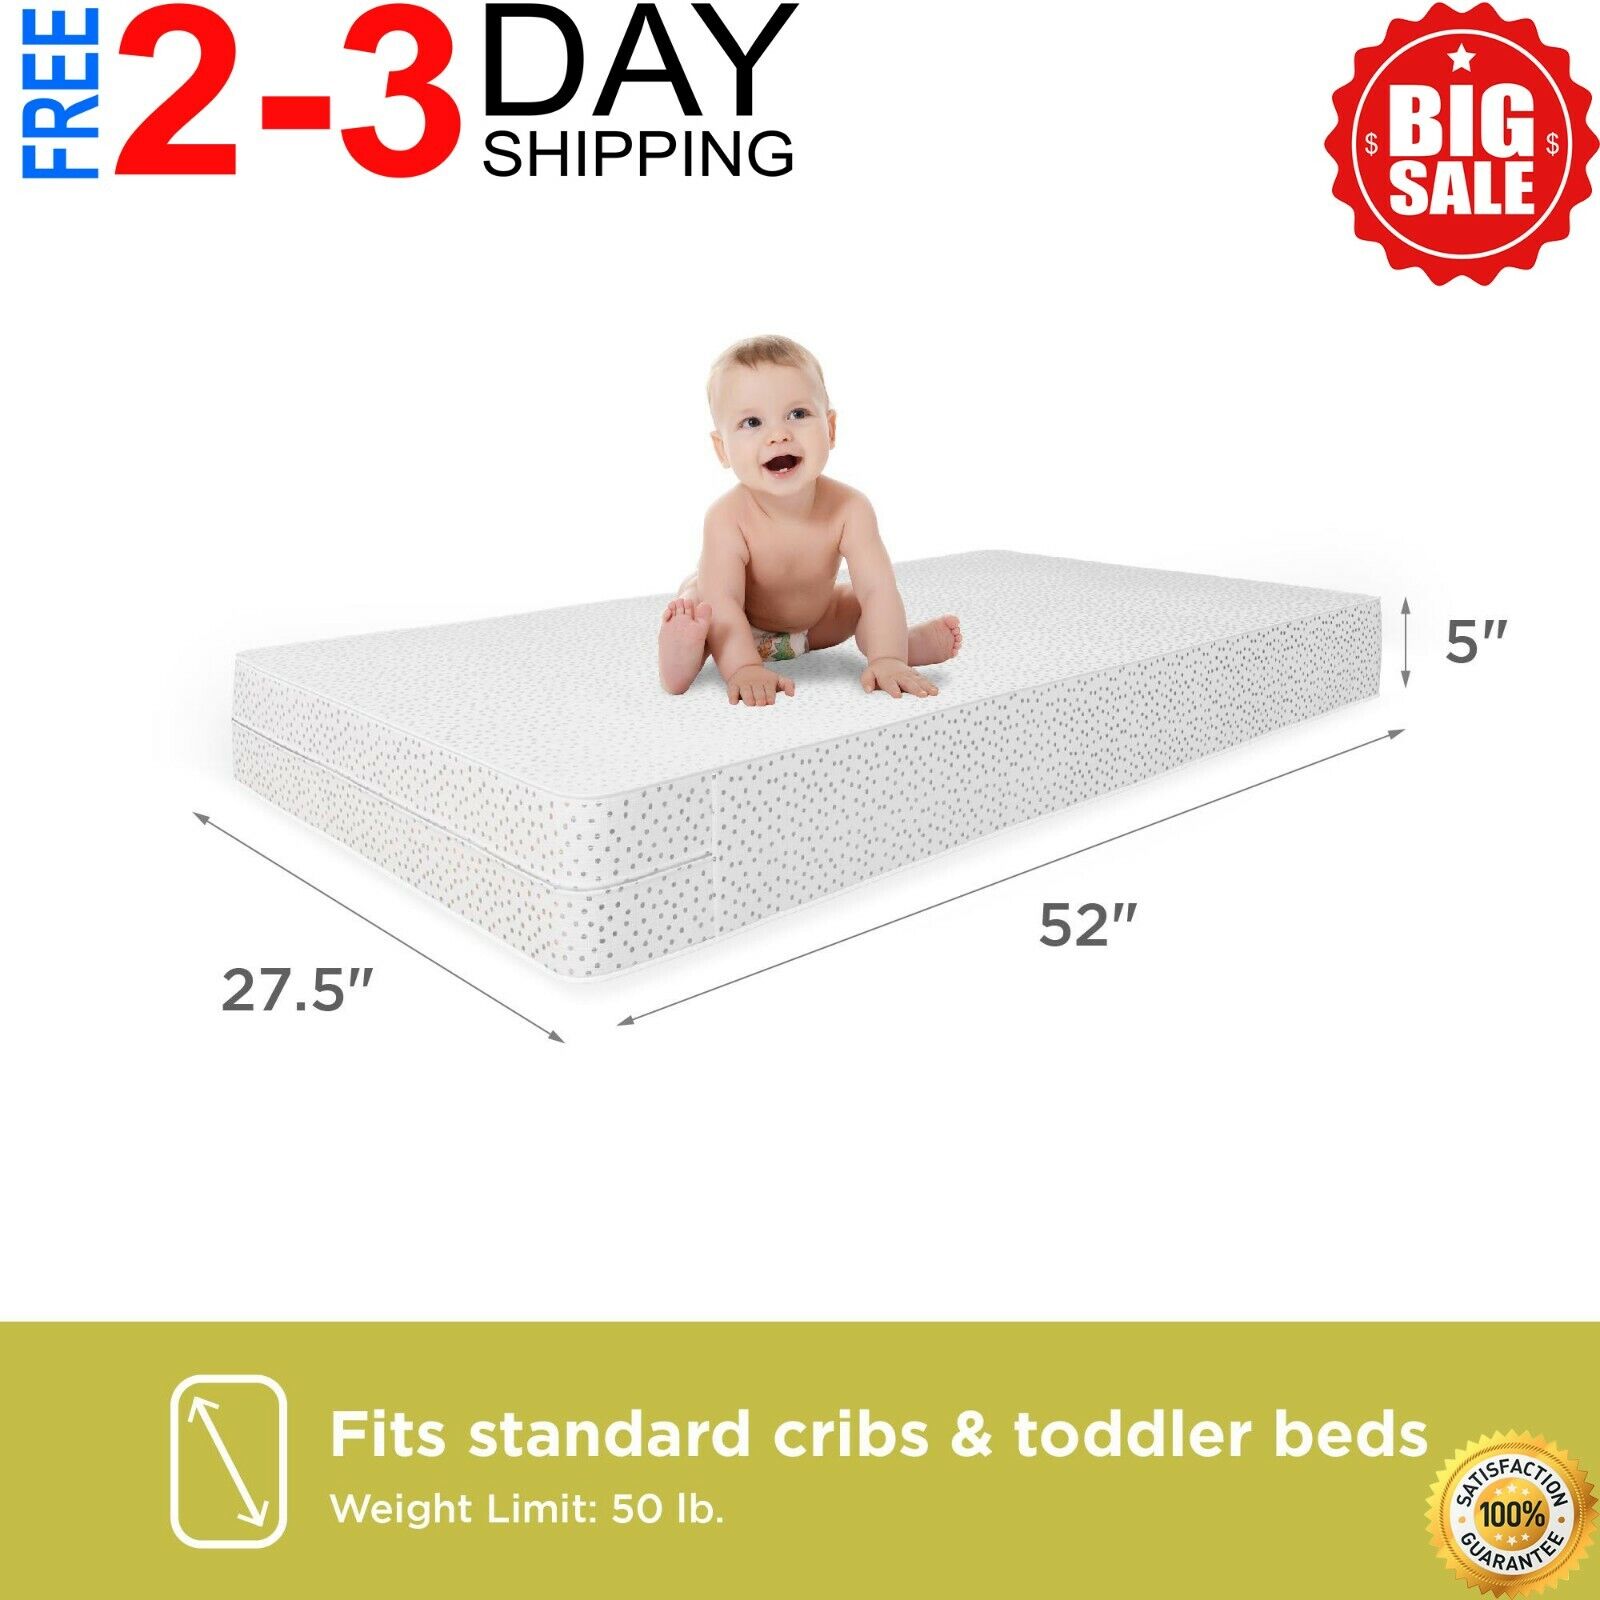 Toddler Foam Mattress Crib 5 Bed Kid Size Small Baby Sleeper Support NEW